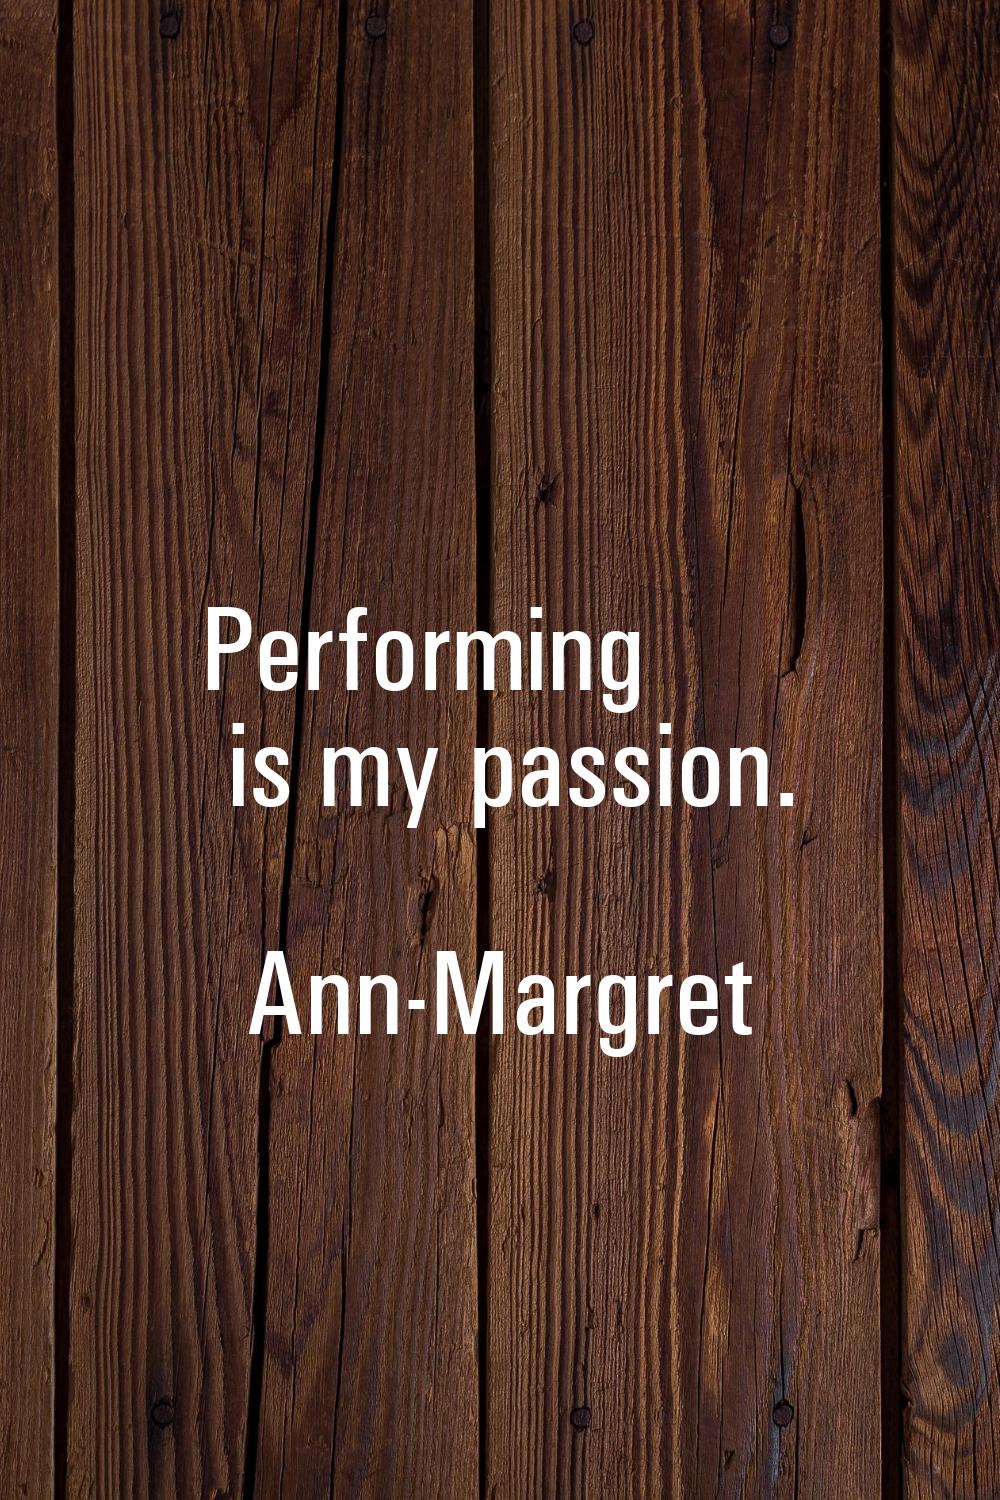 Performing is my passion.